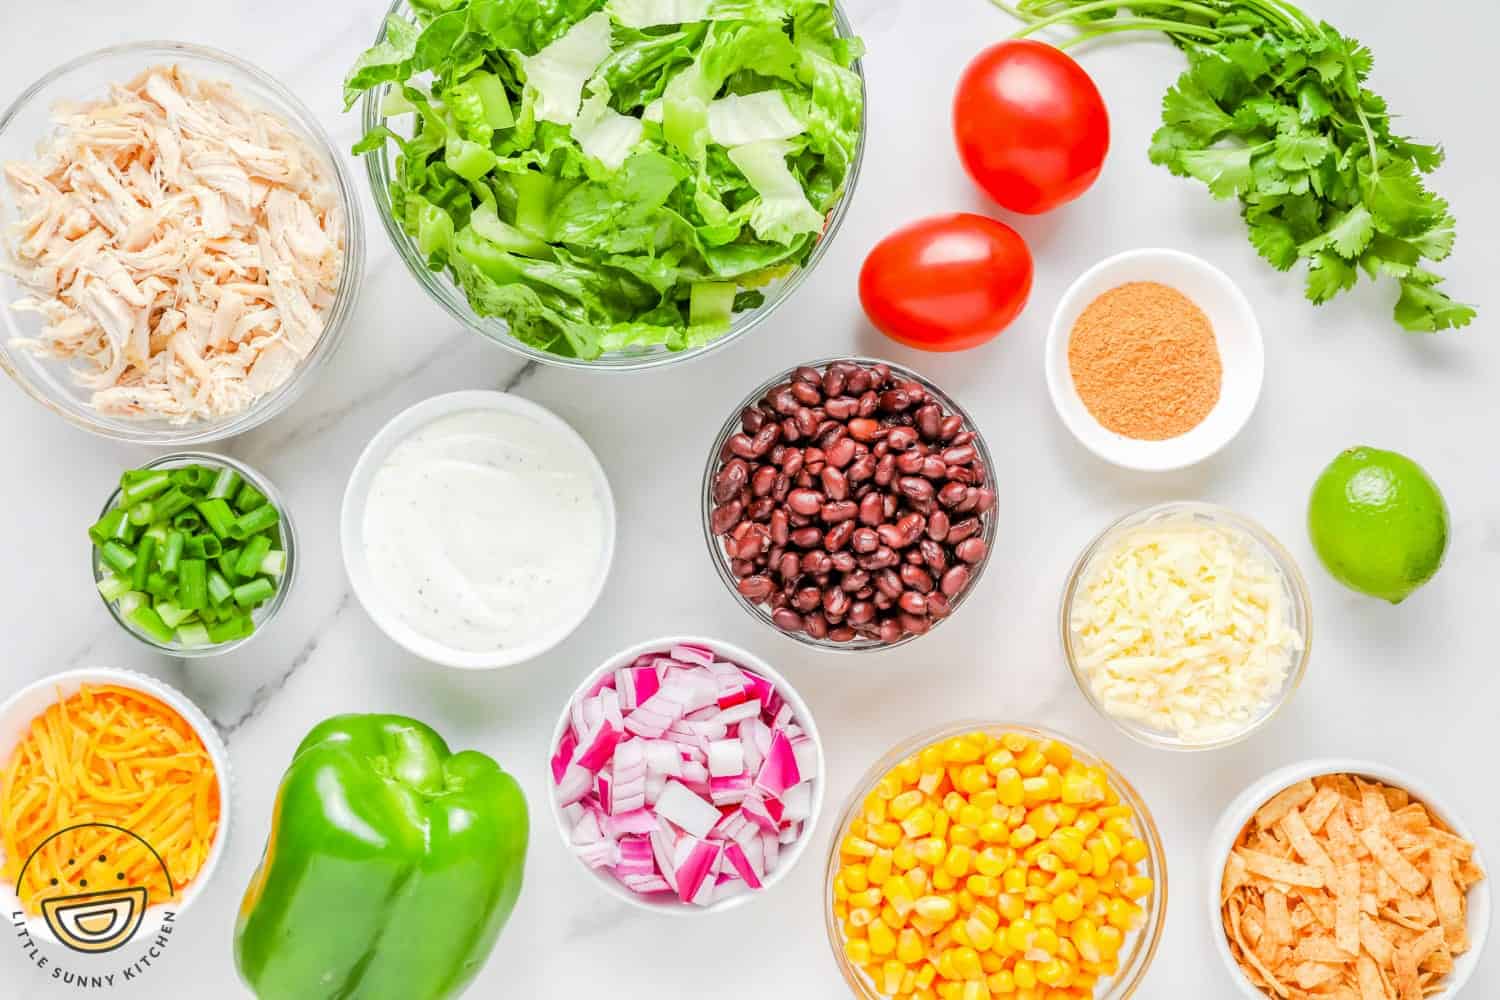 all of the ingredients that go into a tex mex salad, chopped and in small bowls, arranged on a counter.